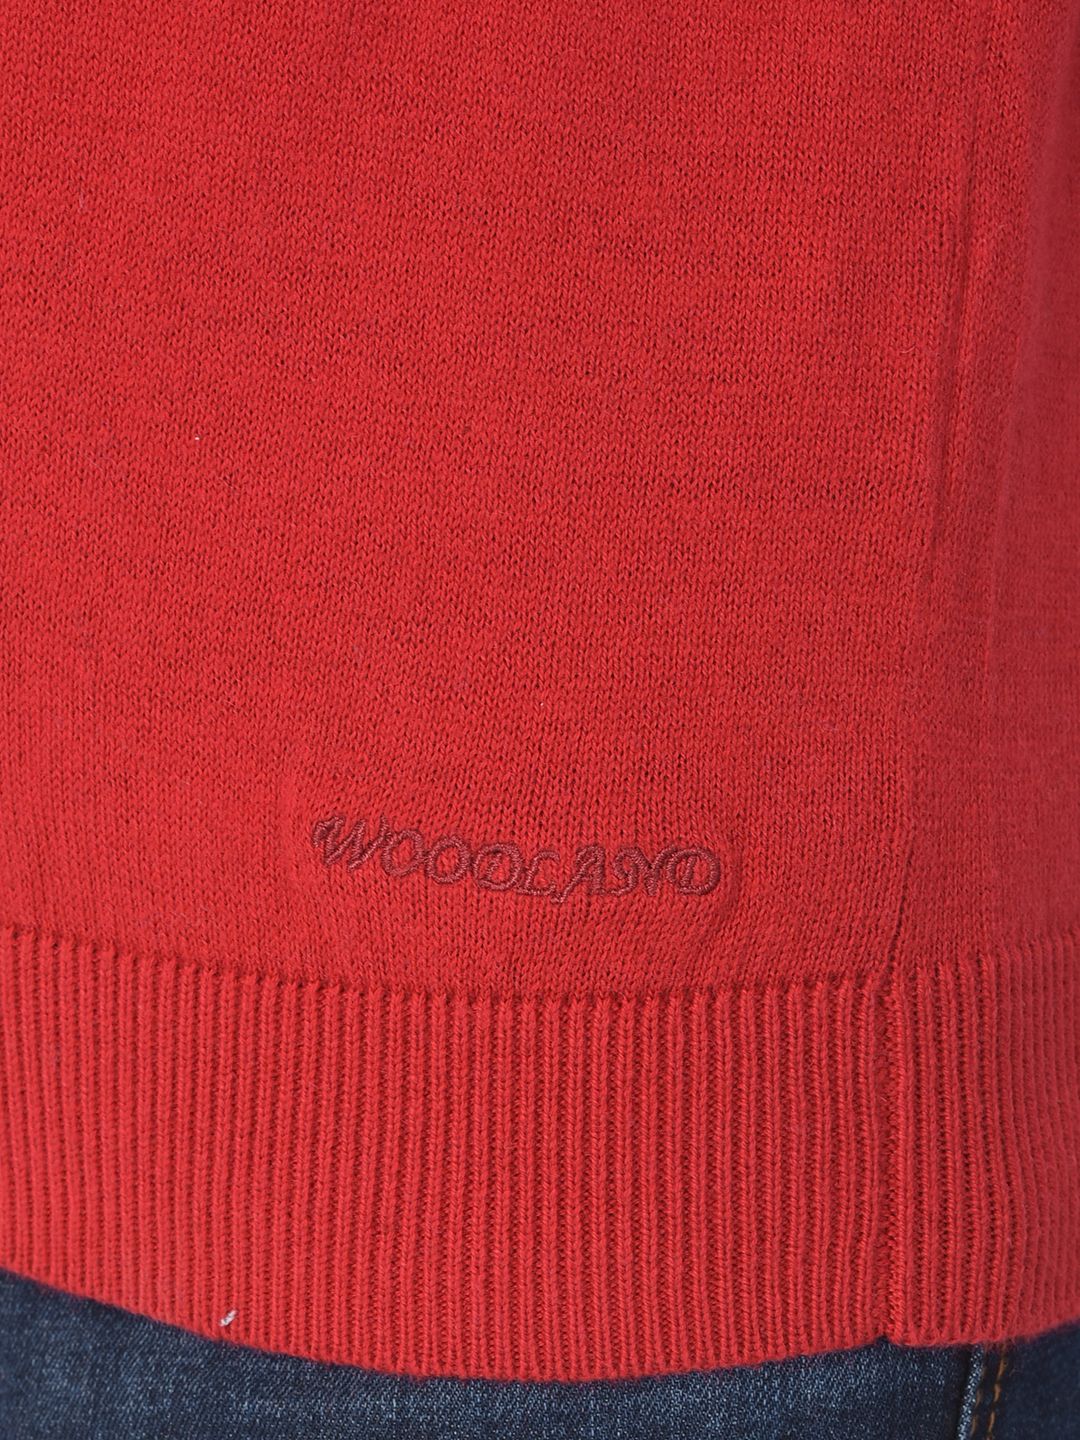 Tango Red v neck pullover sweater